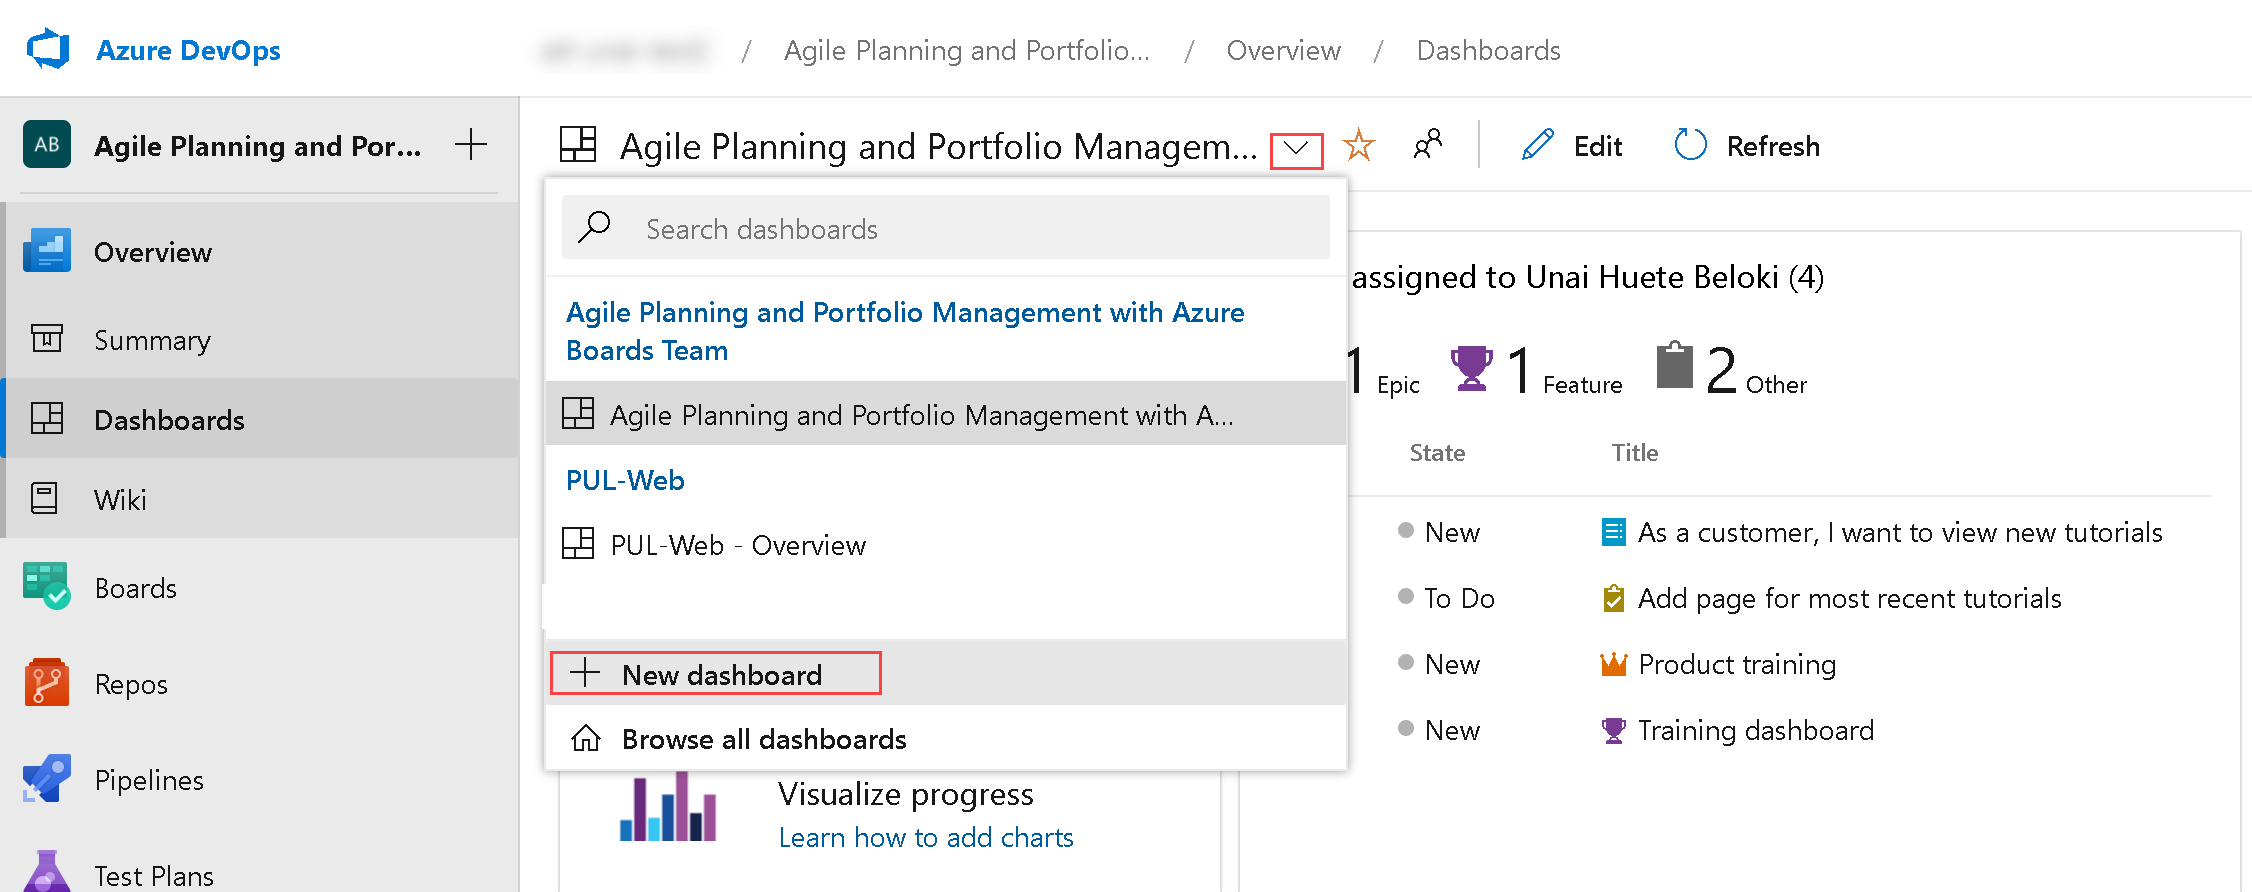 On the "Dashboards" pane, in the upper left corner, in the "Agile Planning
and Portfolio Management with Azure Boards Team" section, select "+ New
dashboard"